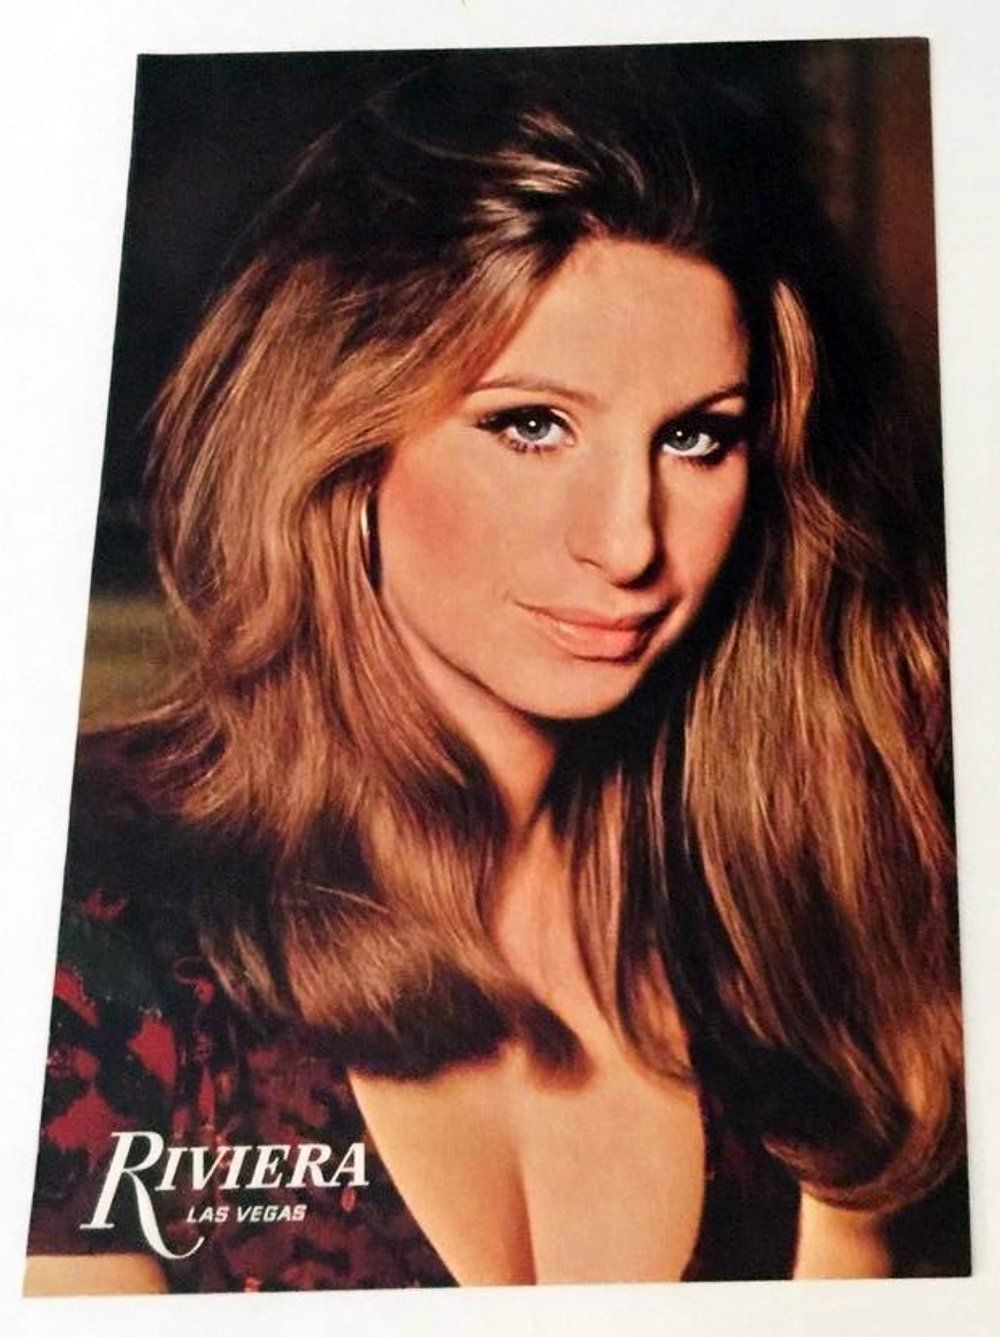 Front cover of Riviera Hotel dinner menu with Streisand's photo